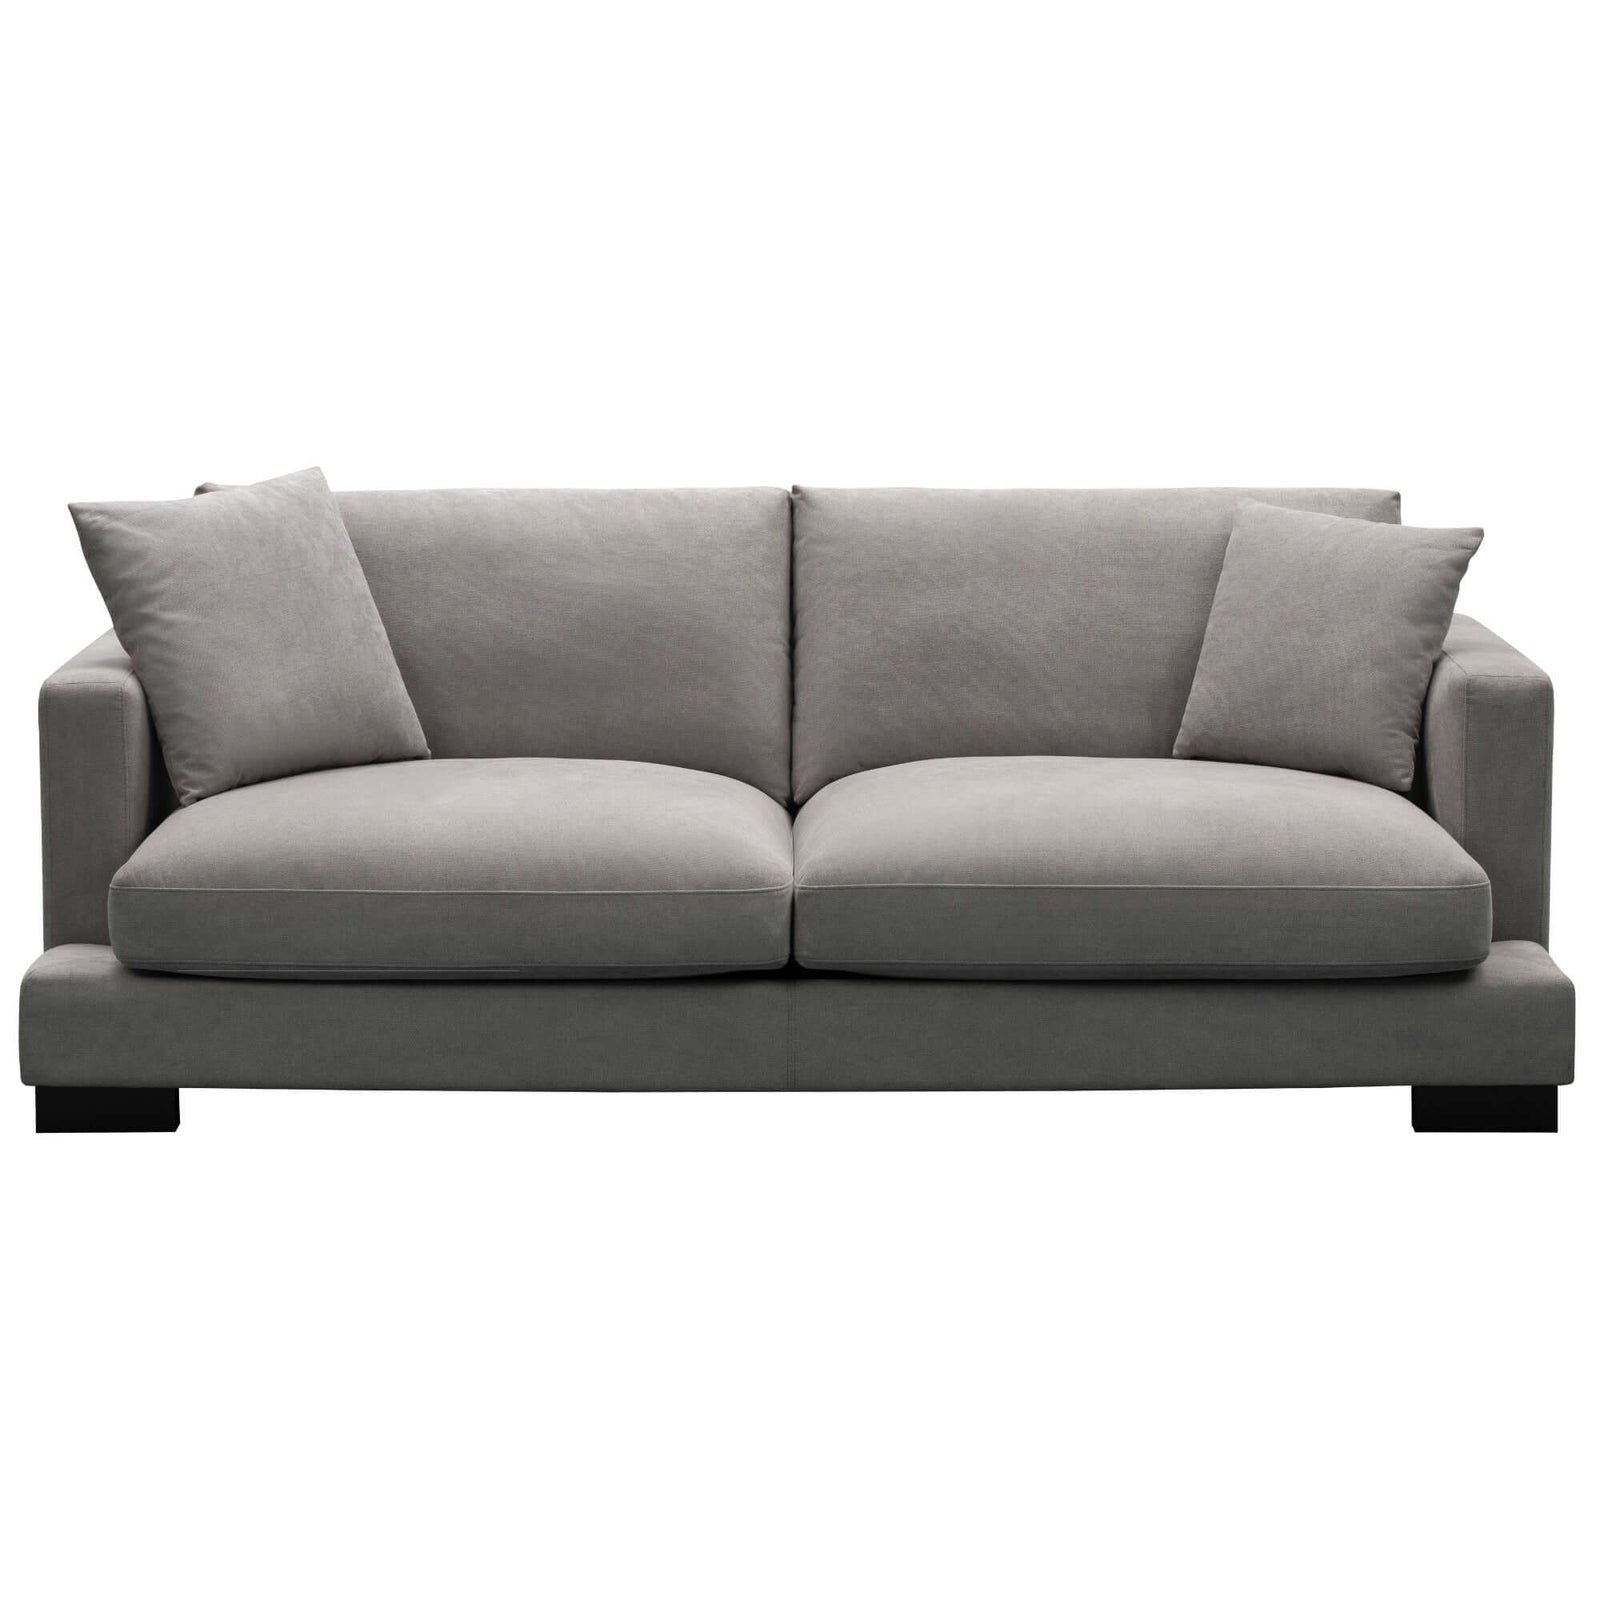 Royalty 3 Seater Sofa Fabric Uplholstered Lounge Couch - Grey-Upinteriors